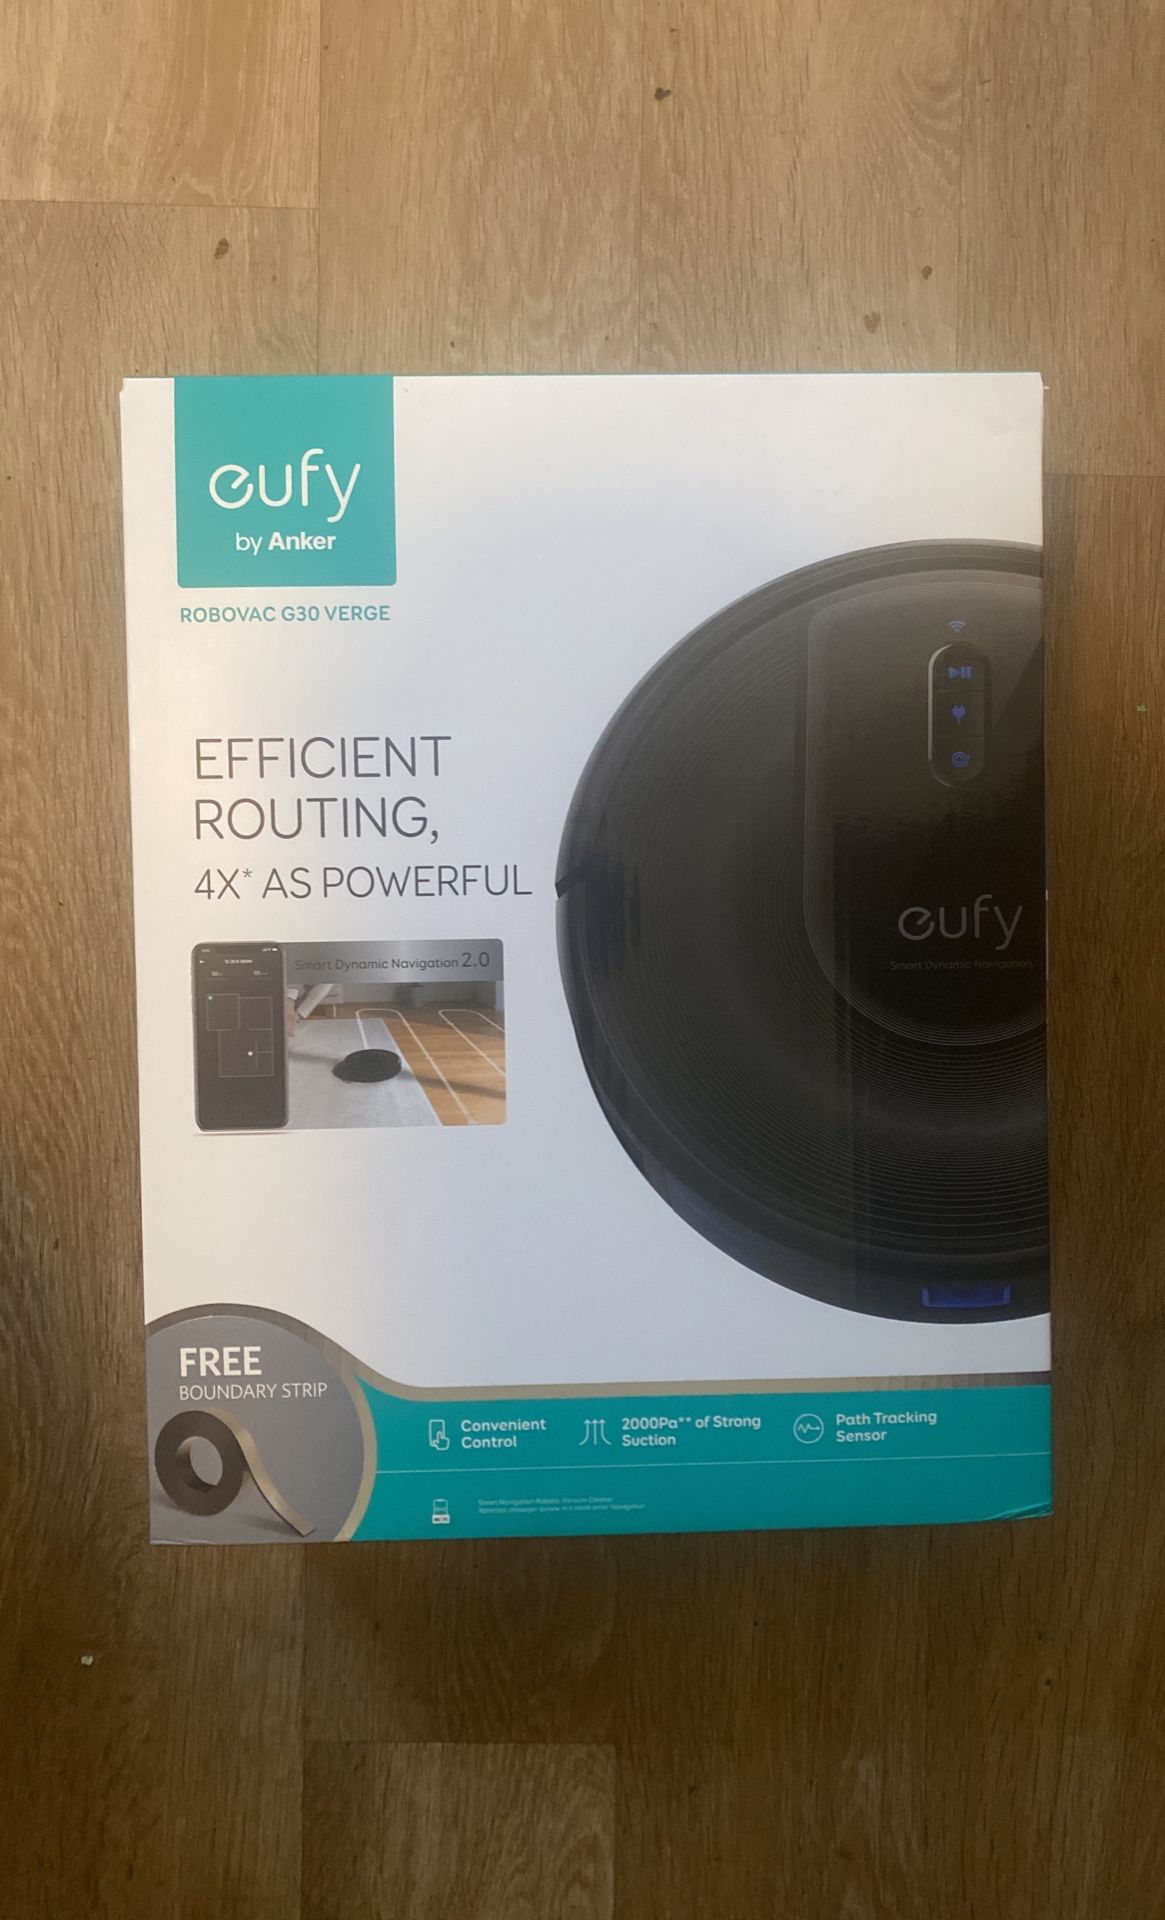 Eufy cleaner 